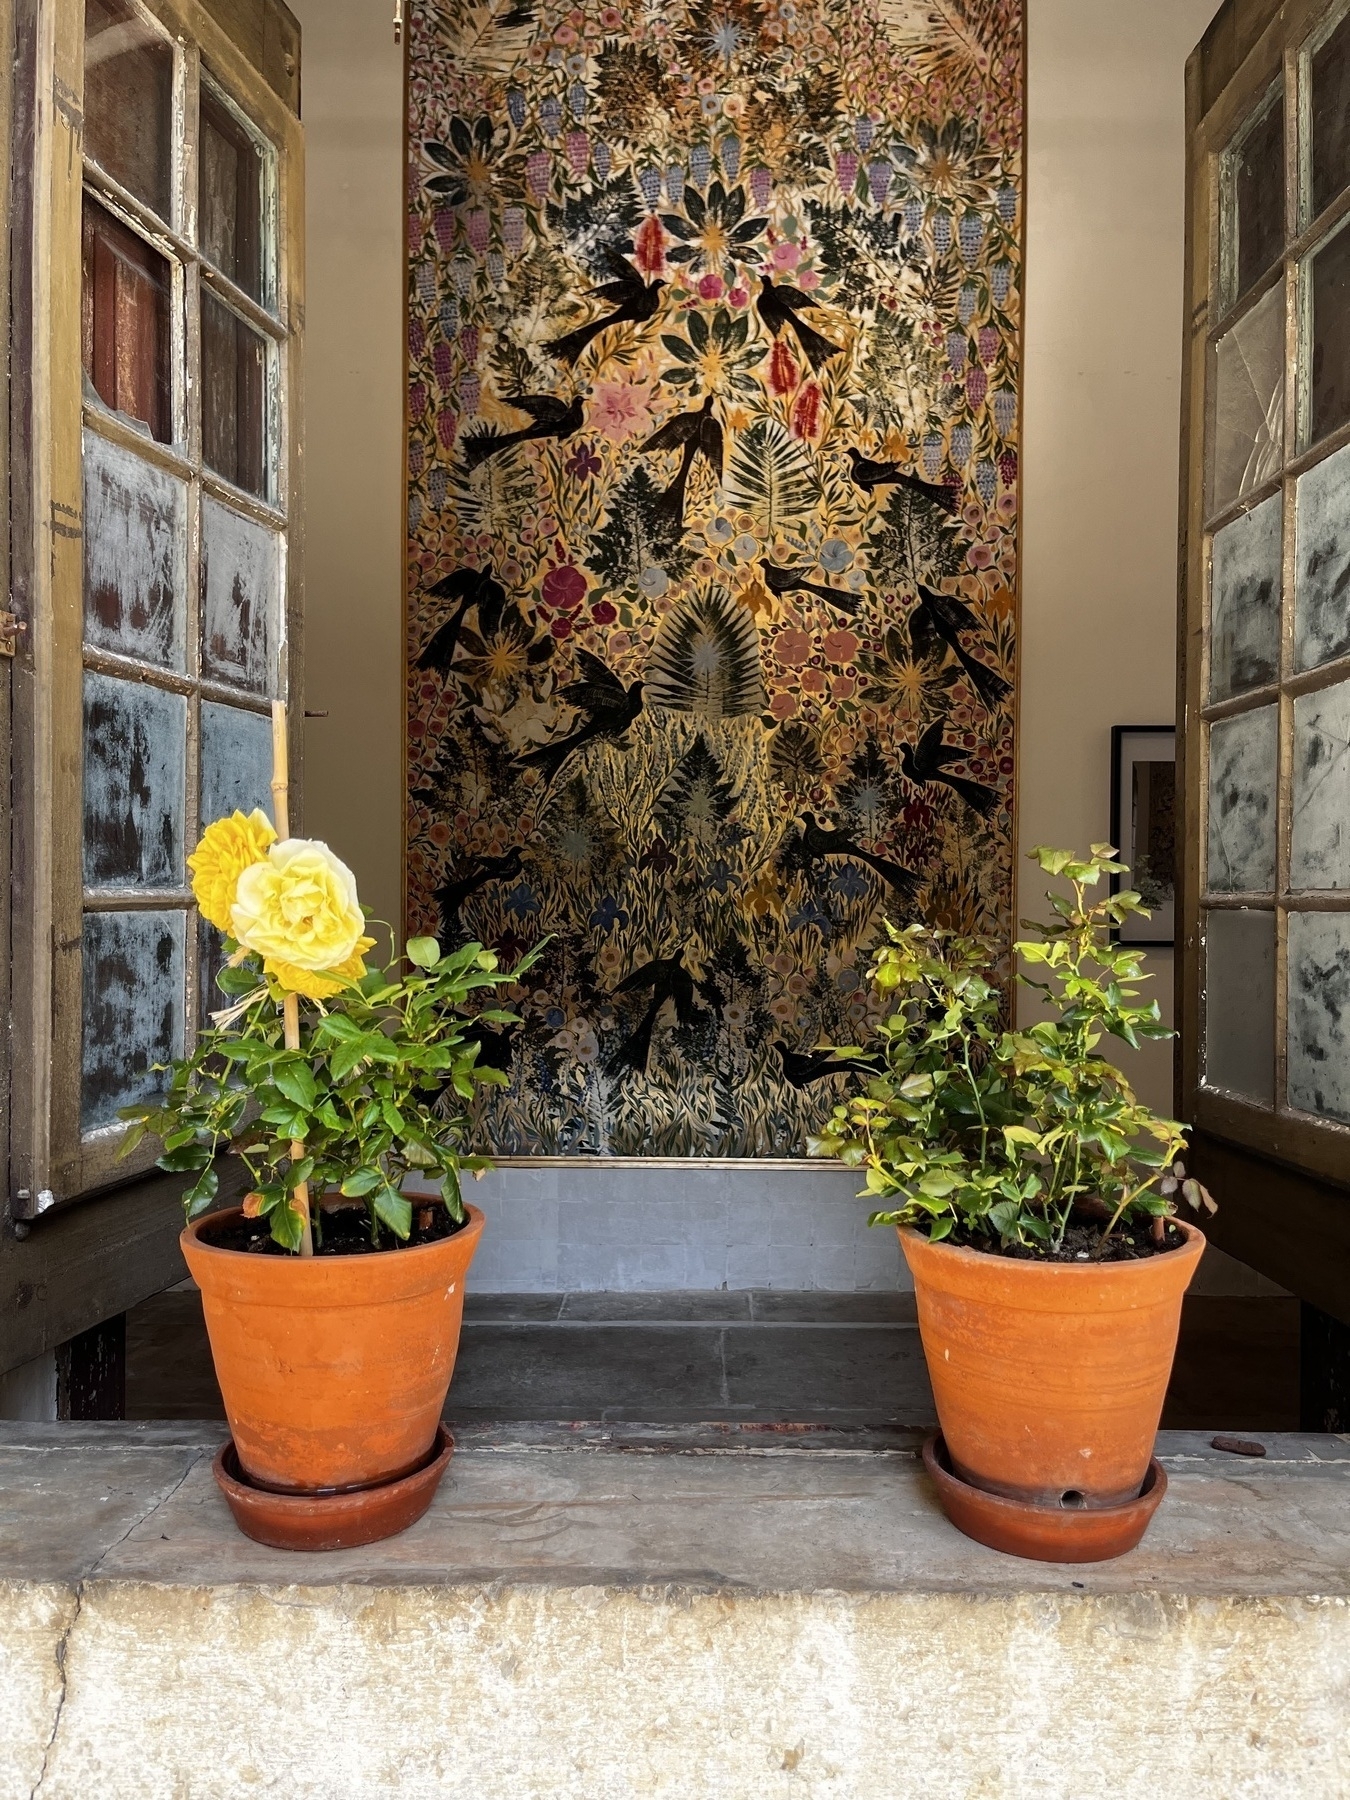 A view through an open window, outside looking in, with yellow potted roses on either side of the window, the left one flowering, and a large painting inside.